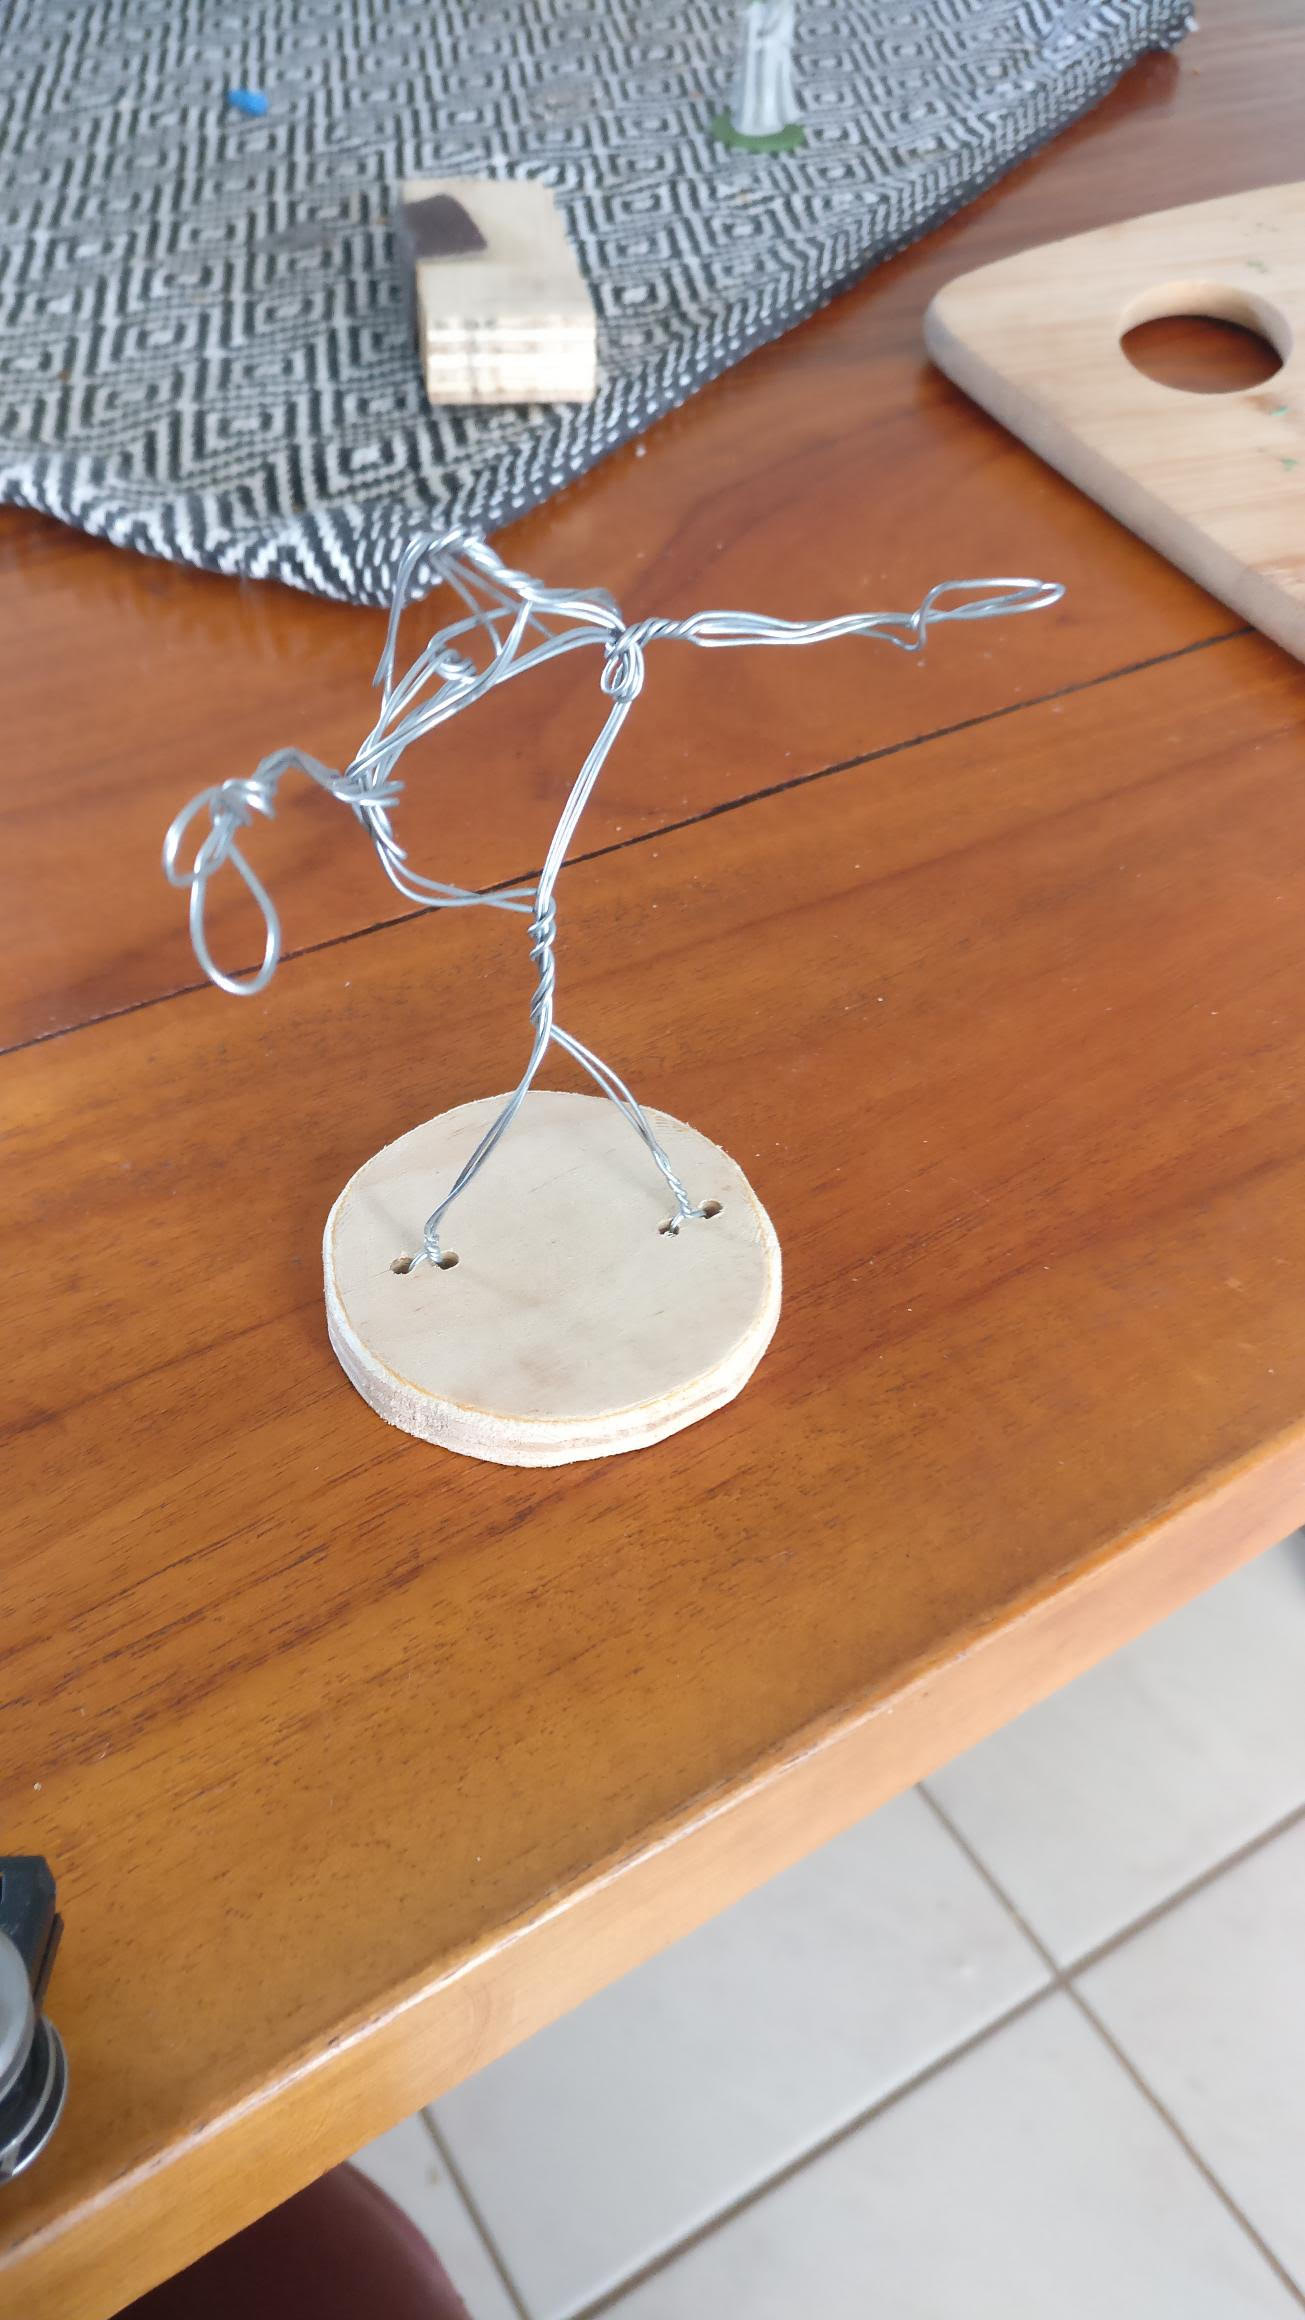 pic of wire figure